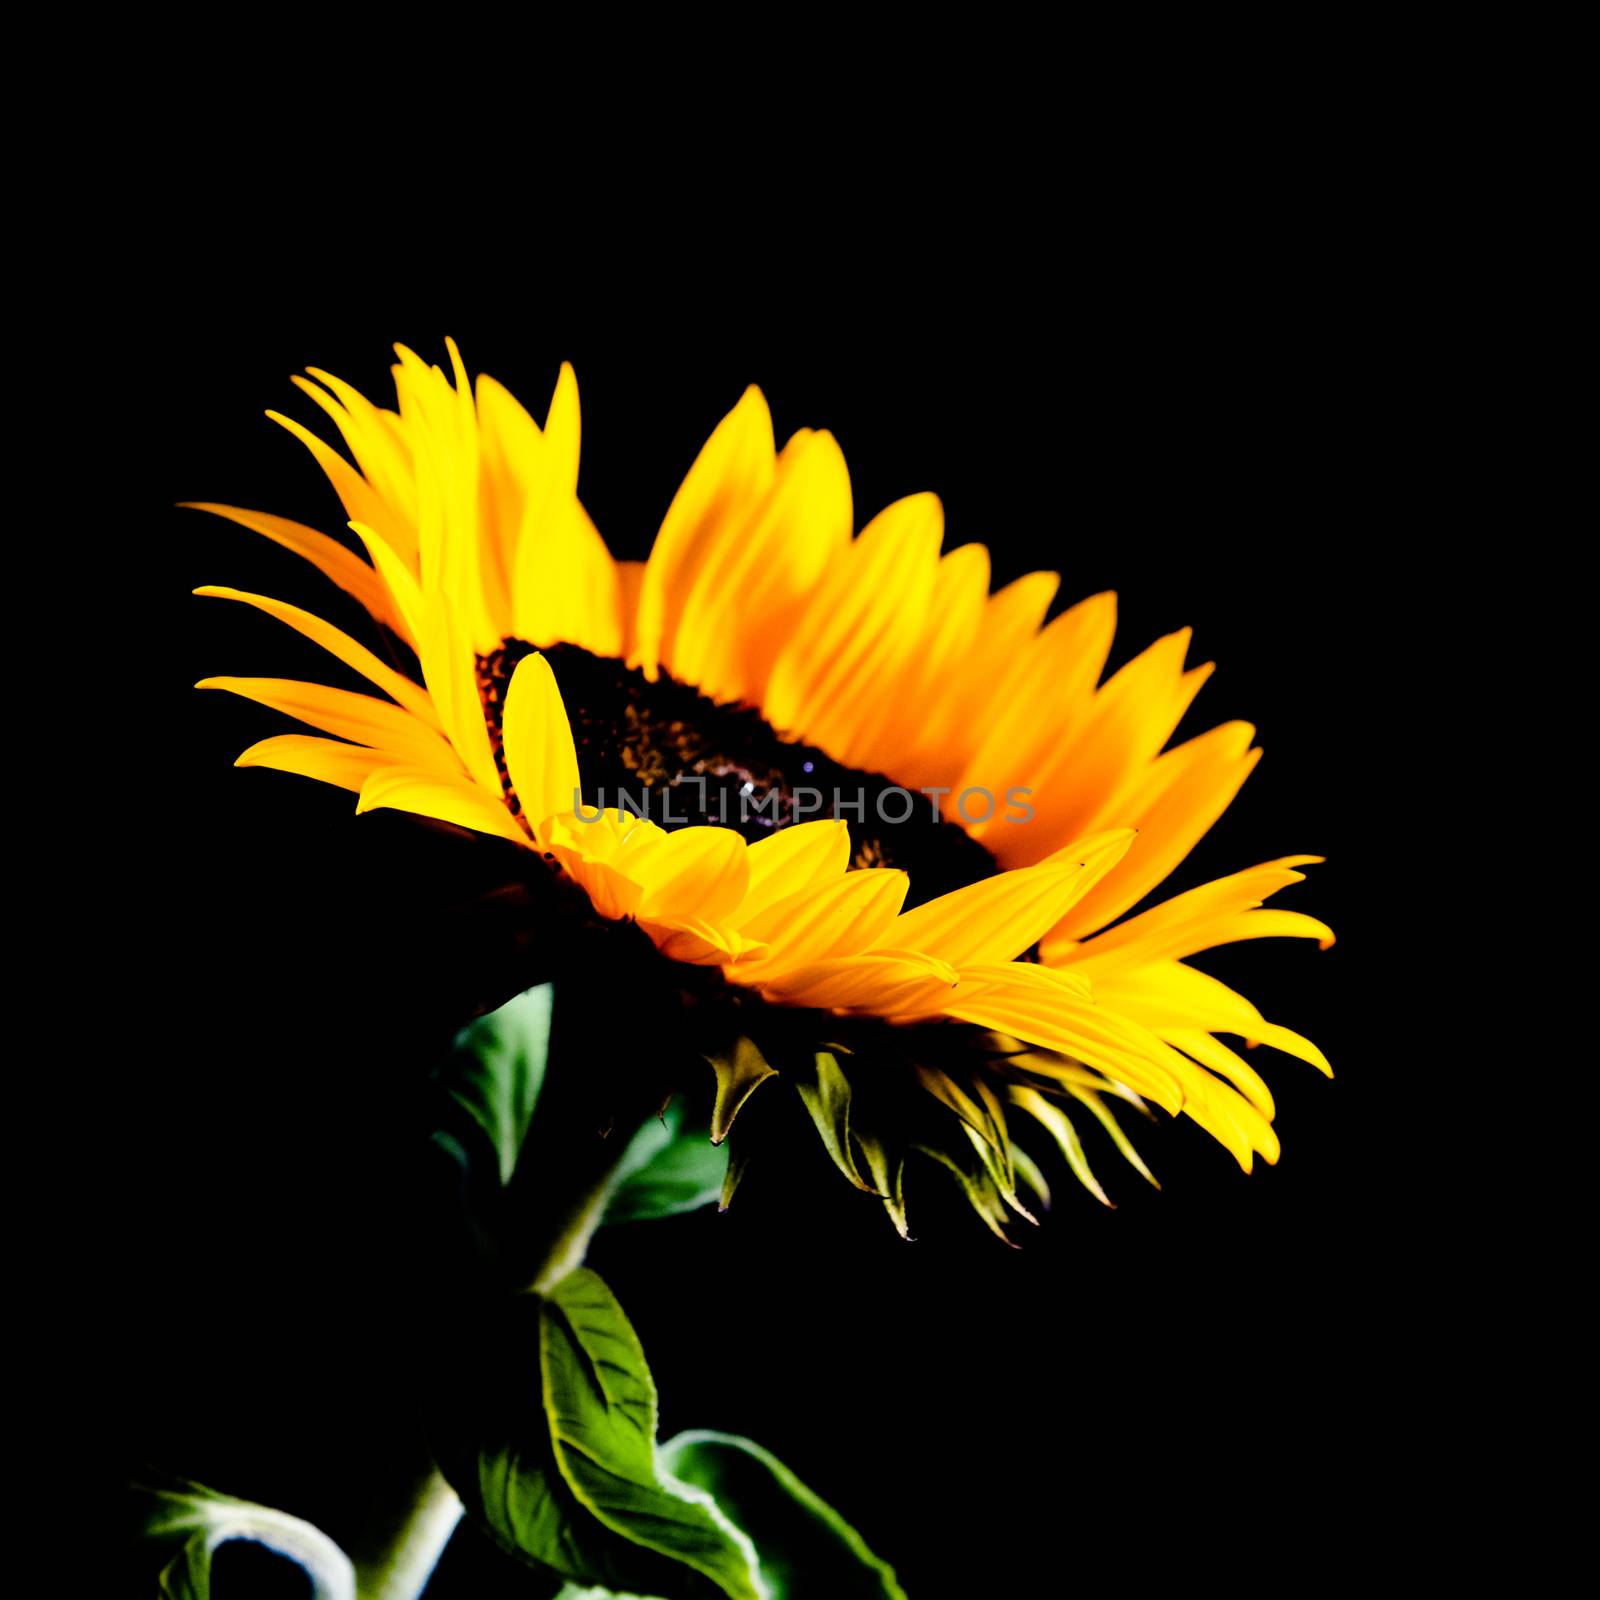 Sunflower isolated on black background. Low key image by pyty